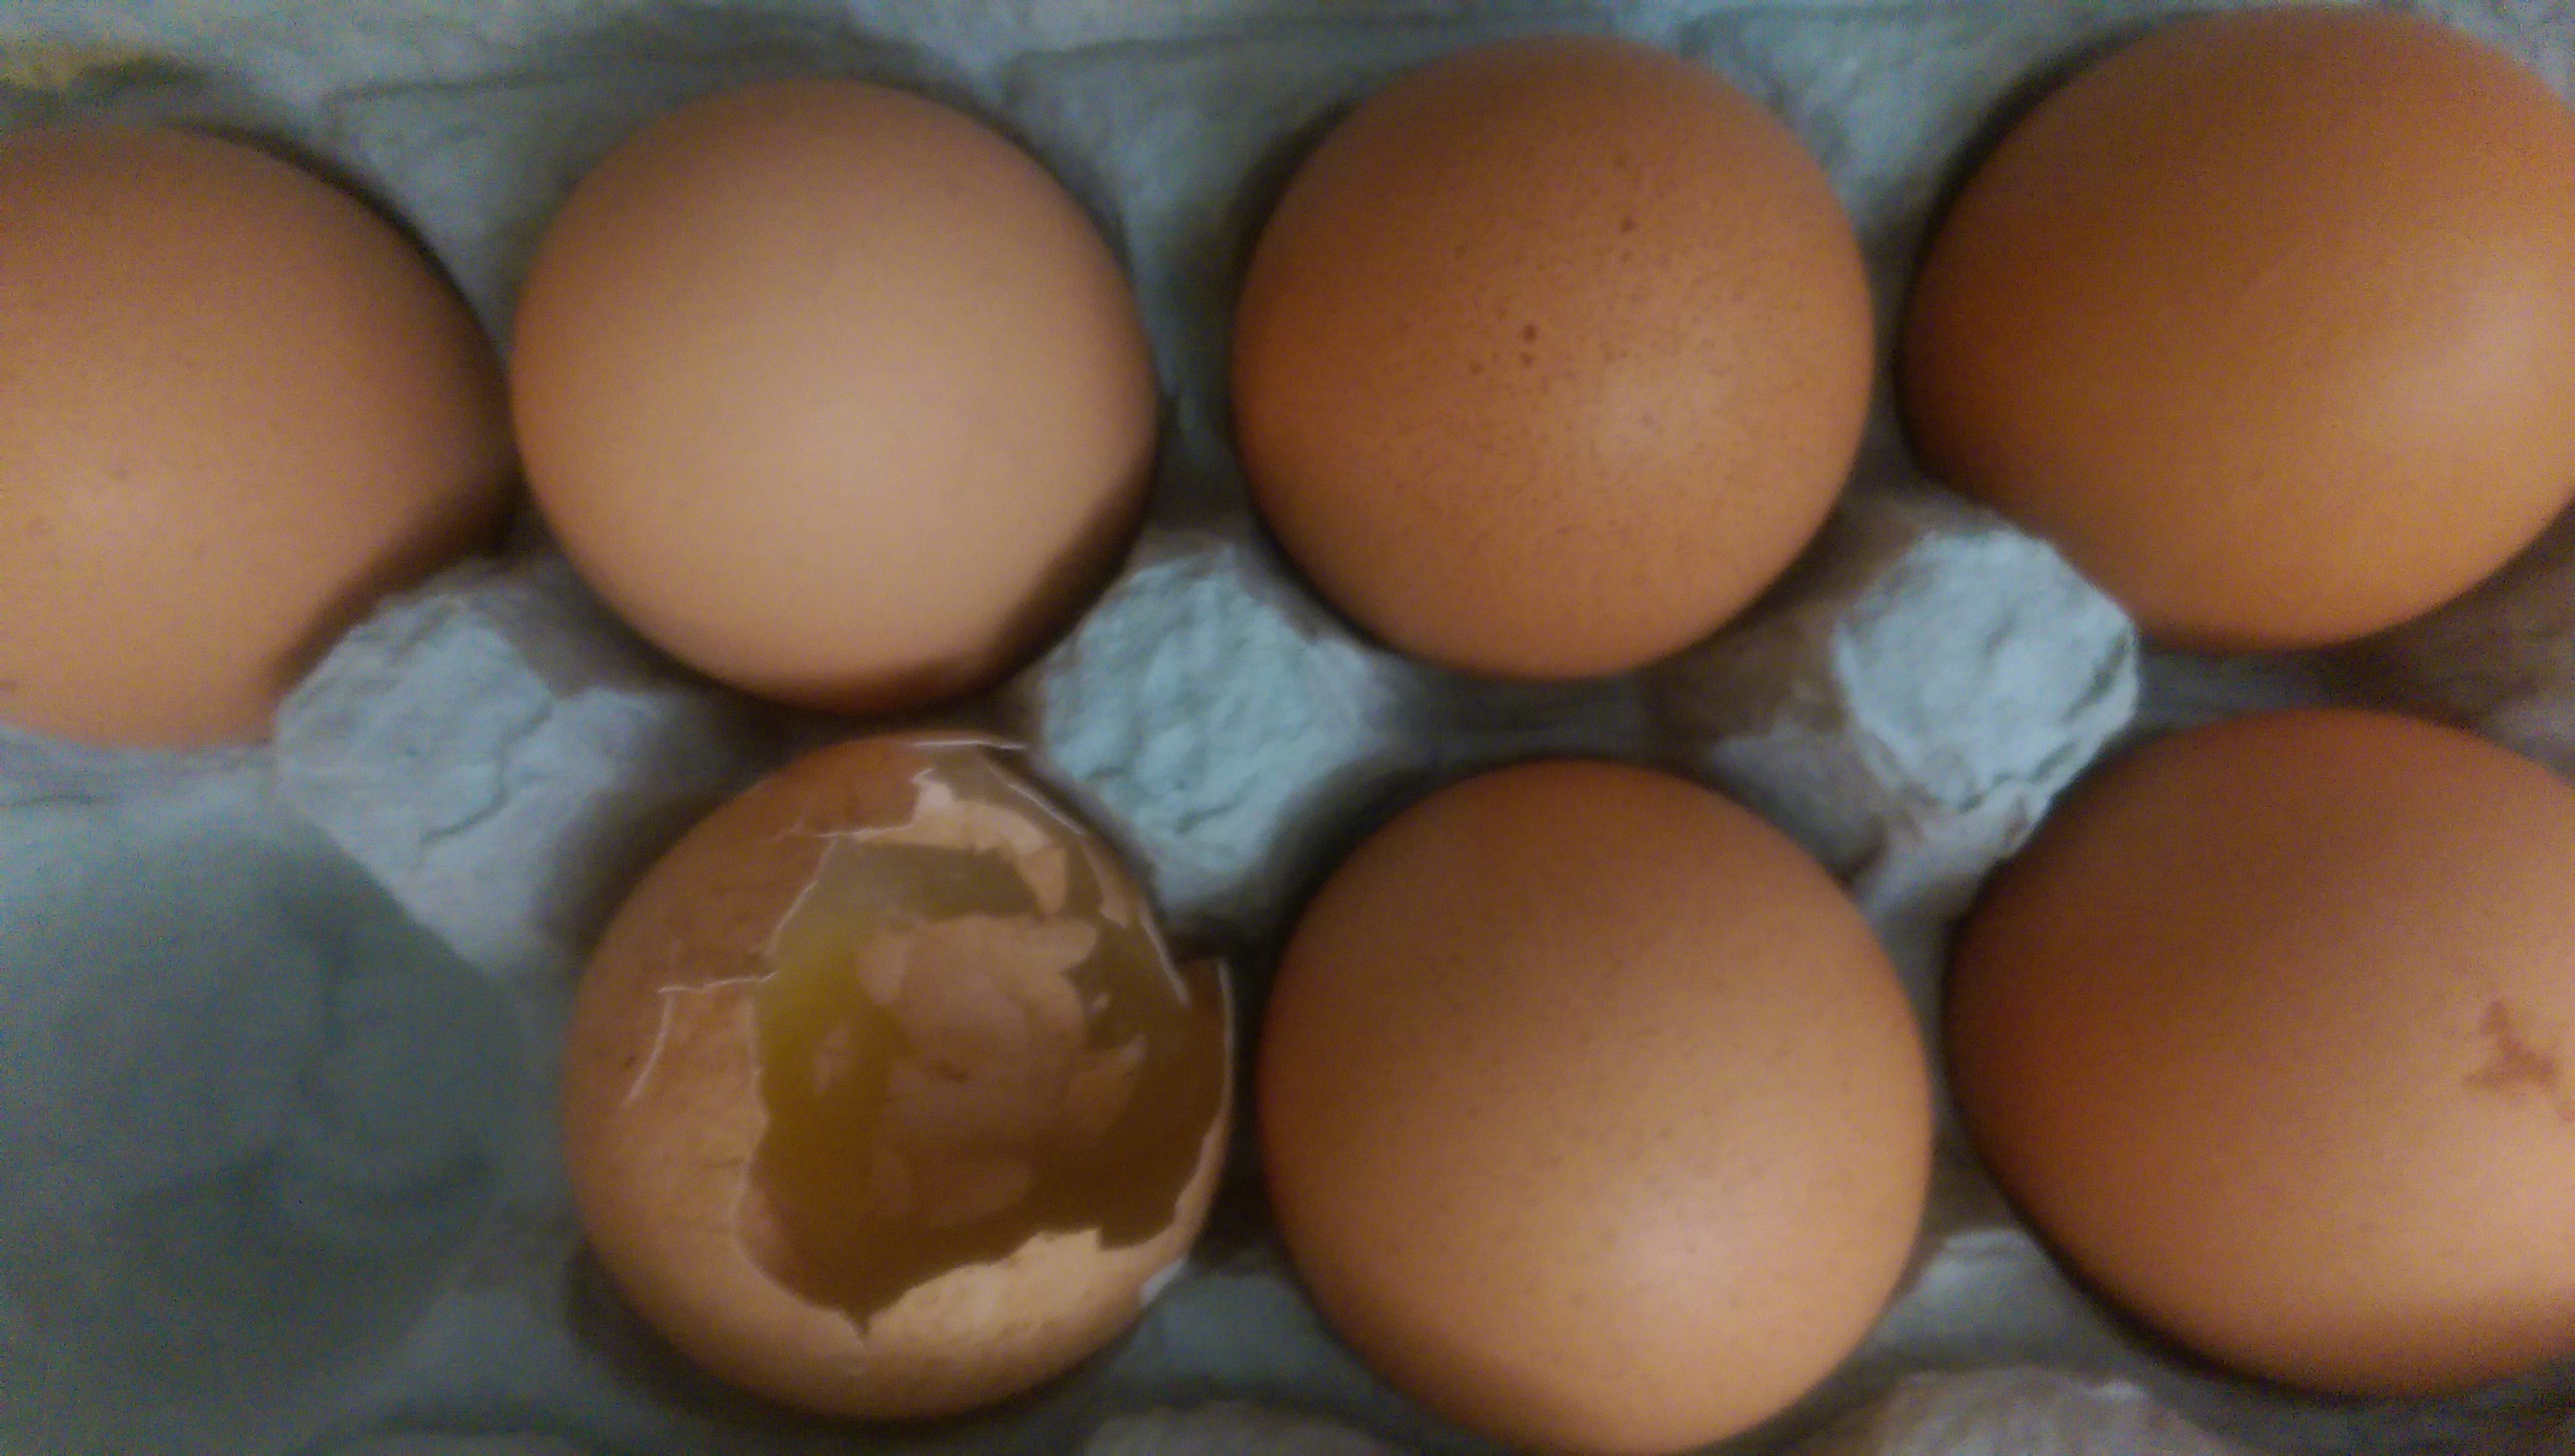 A carton of brown eggs, one broken and full of yolk.